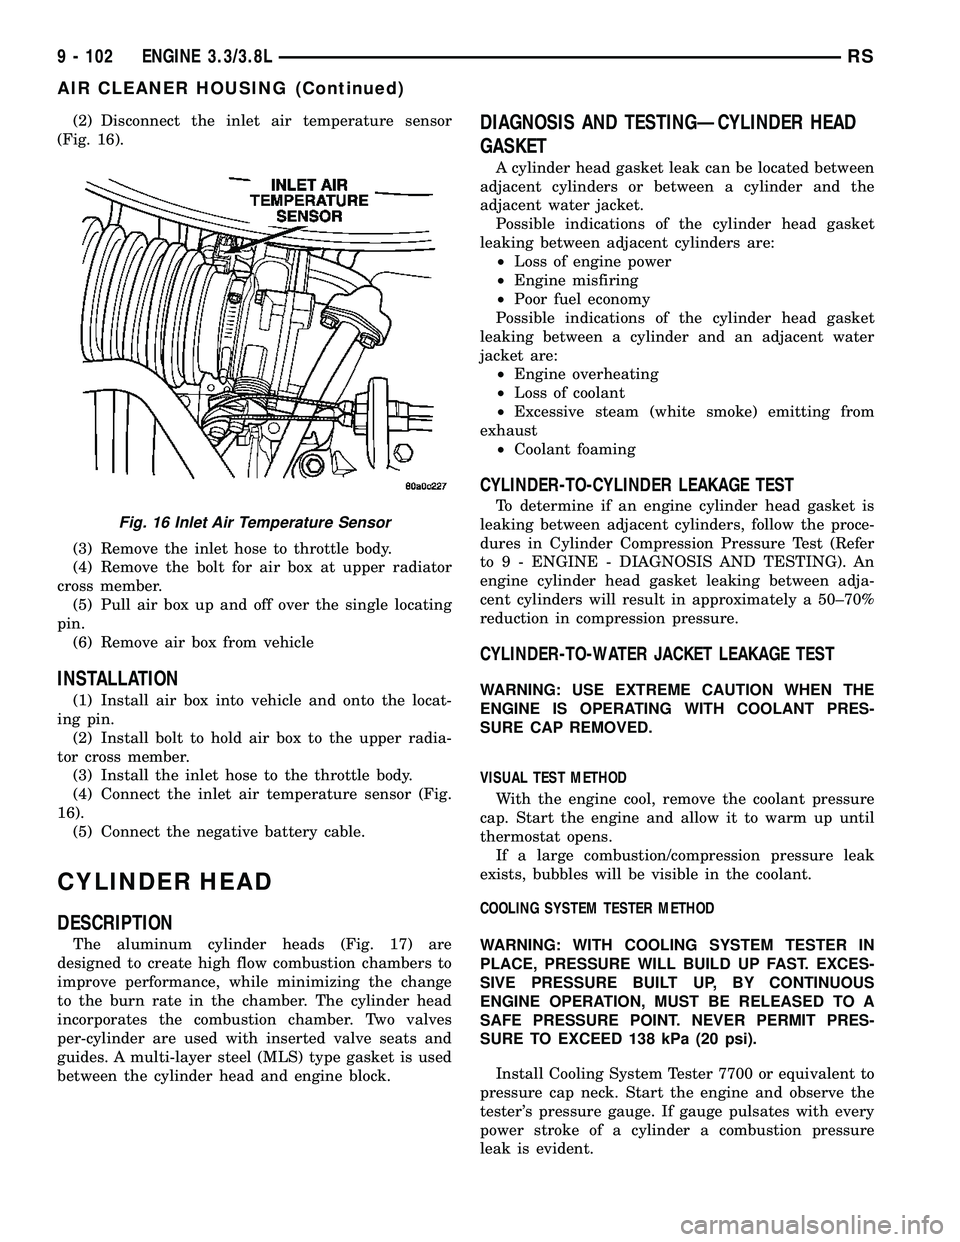 CHRYSLER VOYAGER 2005  Service Manual (2) Disconnect the inlet air temperature sensor
(Fig. 16).
(3) Remove the inlet hose to throttle body.
(4) Remove the bolt for air box at upper radiator
cross member.
(5) Pull air box up and off over 